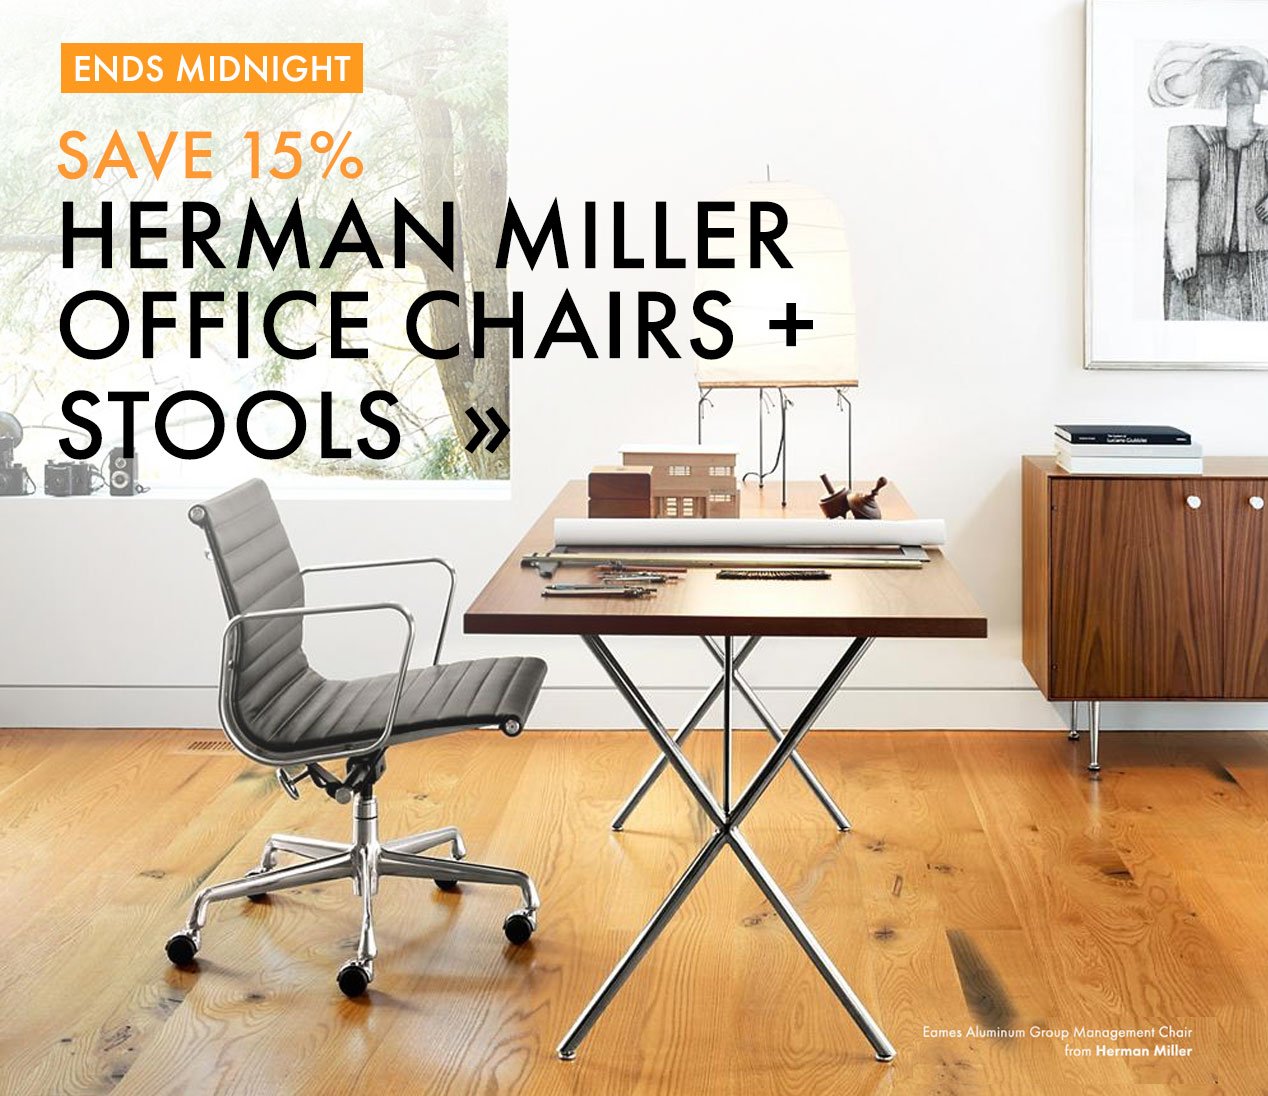 Herman Miller Office Chairs + Stools.